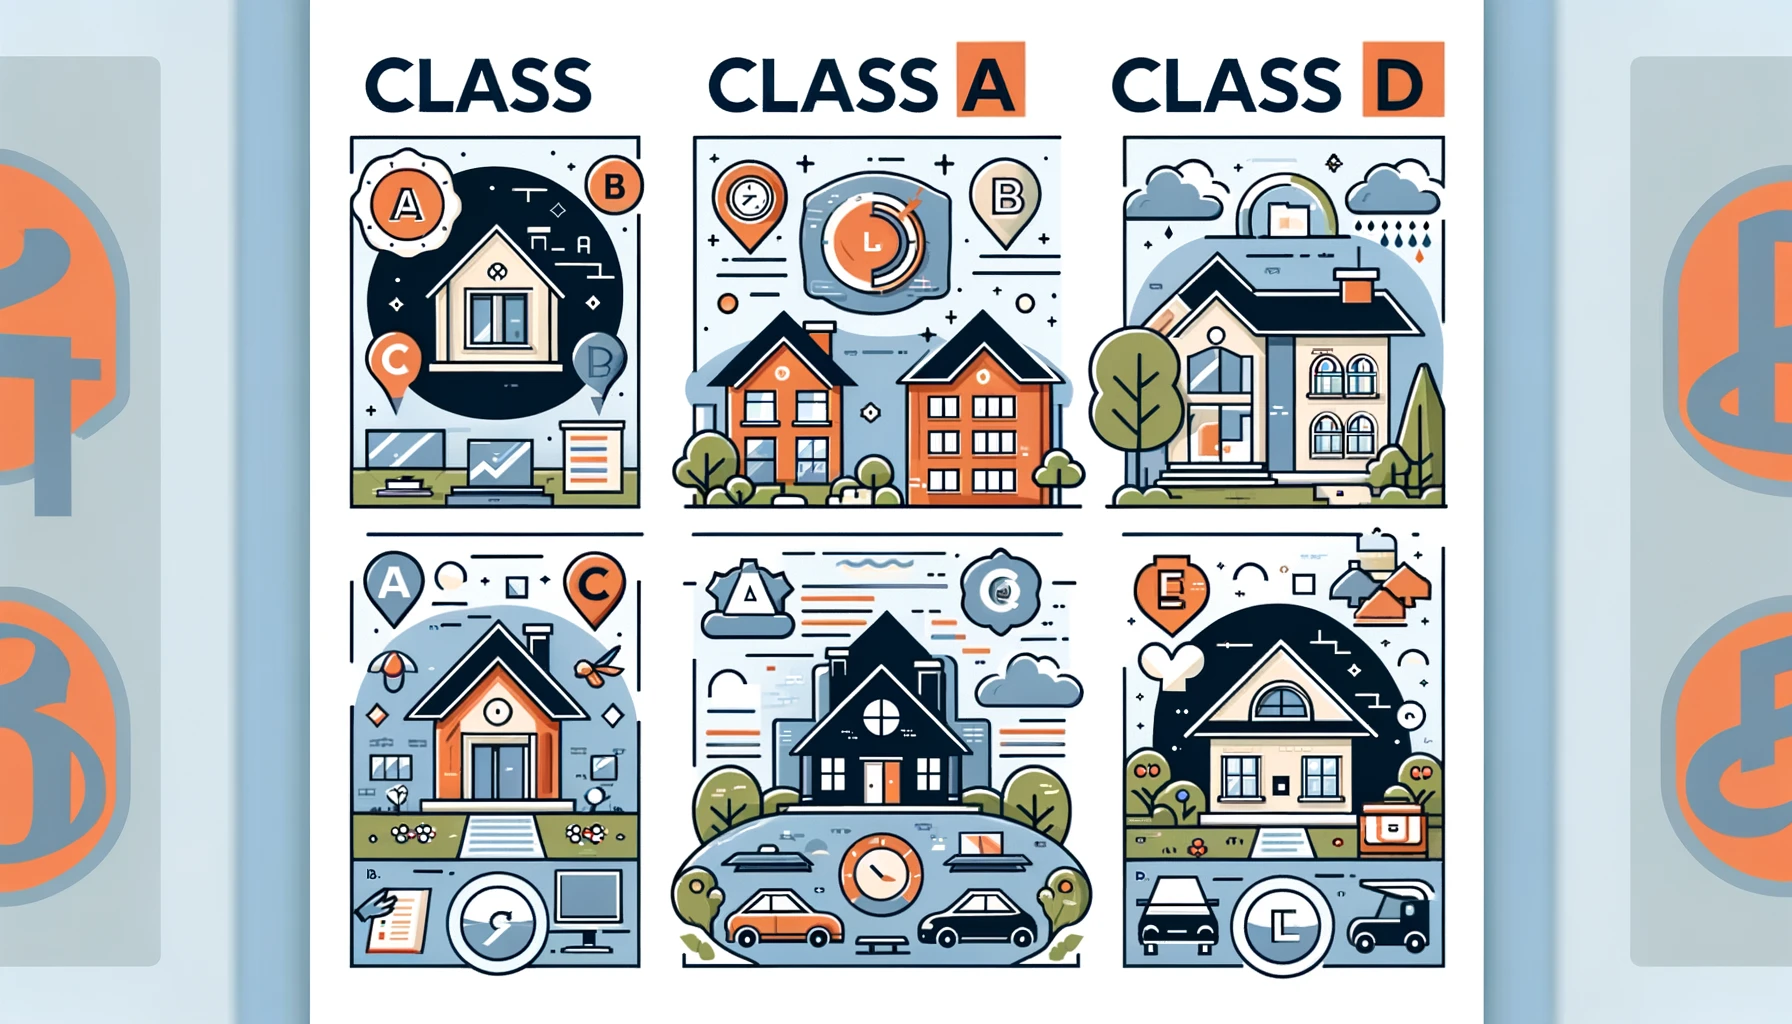 Wide-format infographic displaying icons indicative of Class A, B, C, and D real estate properties, illustrating quality and amenities without text